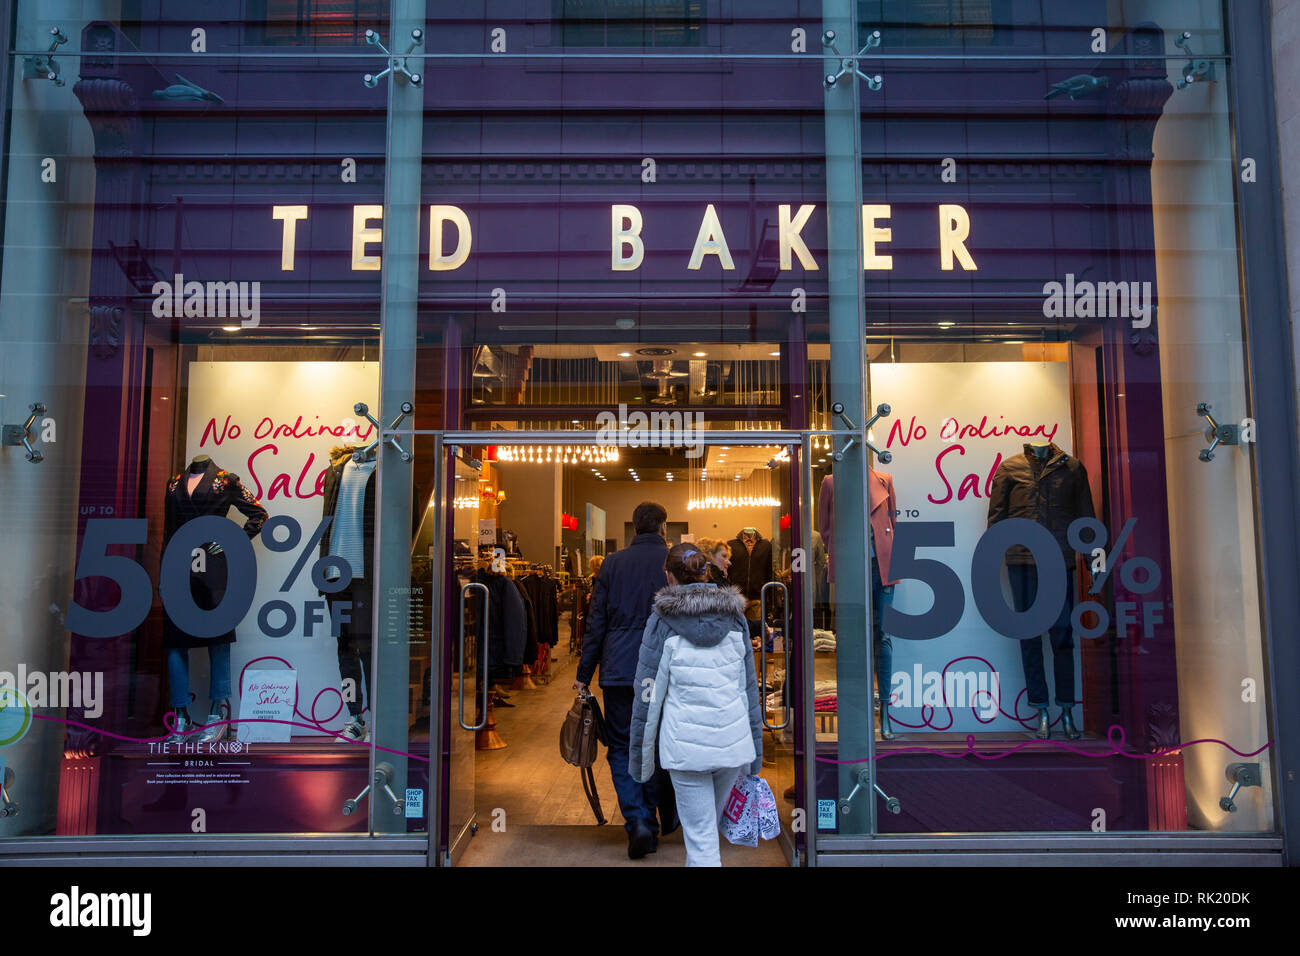 Ted Baker clothing store in New Cathedral street,Manchester city centre,England with 50% off New Year sale Stock Photo